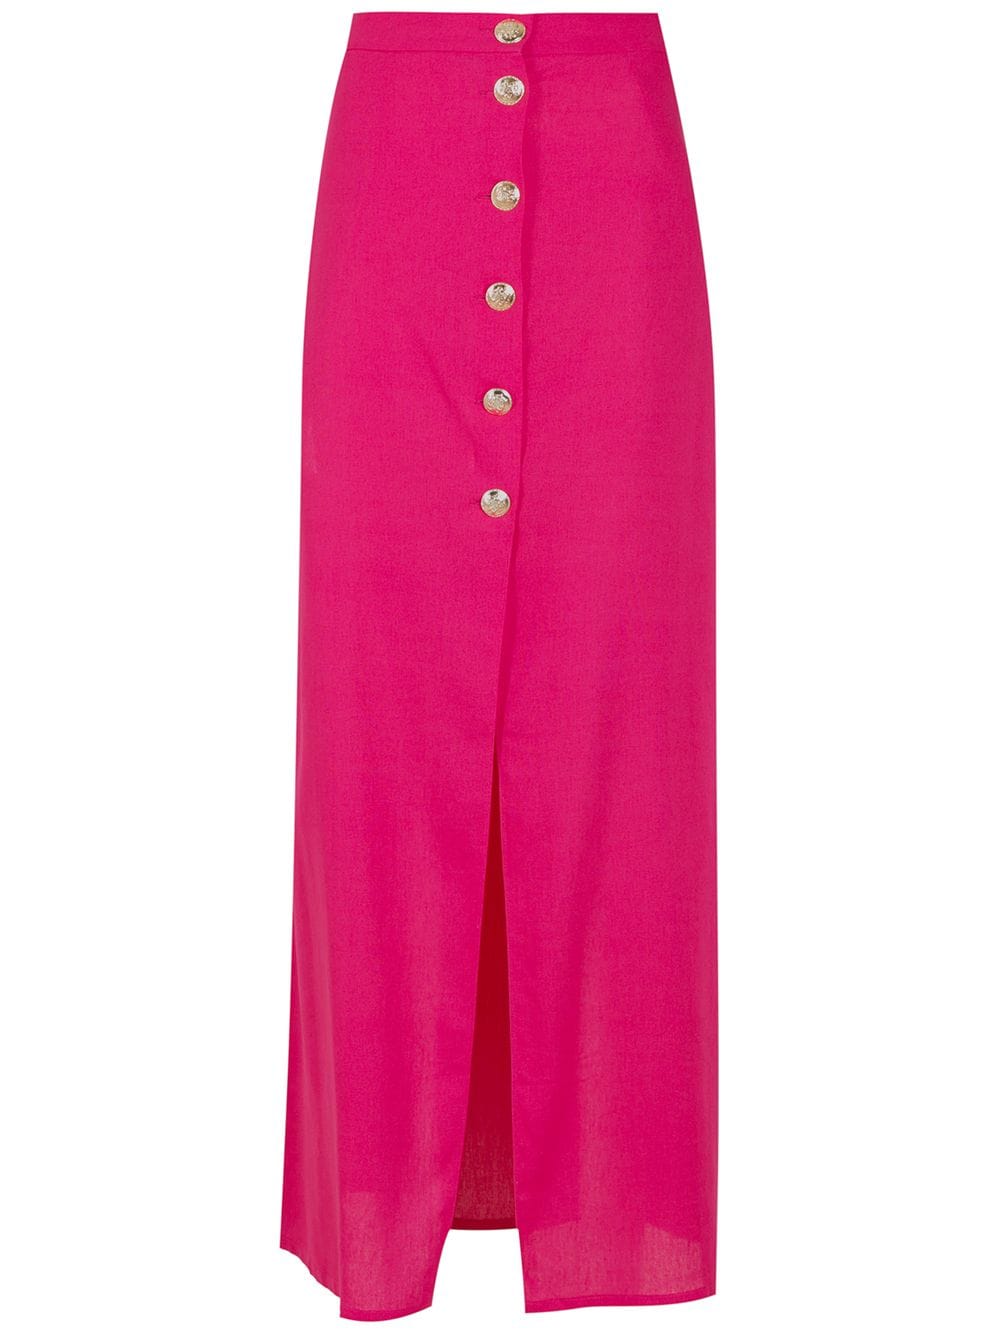 Adriana Degreas buttoned-up stretch-linen full skirt